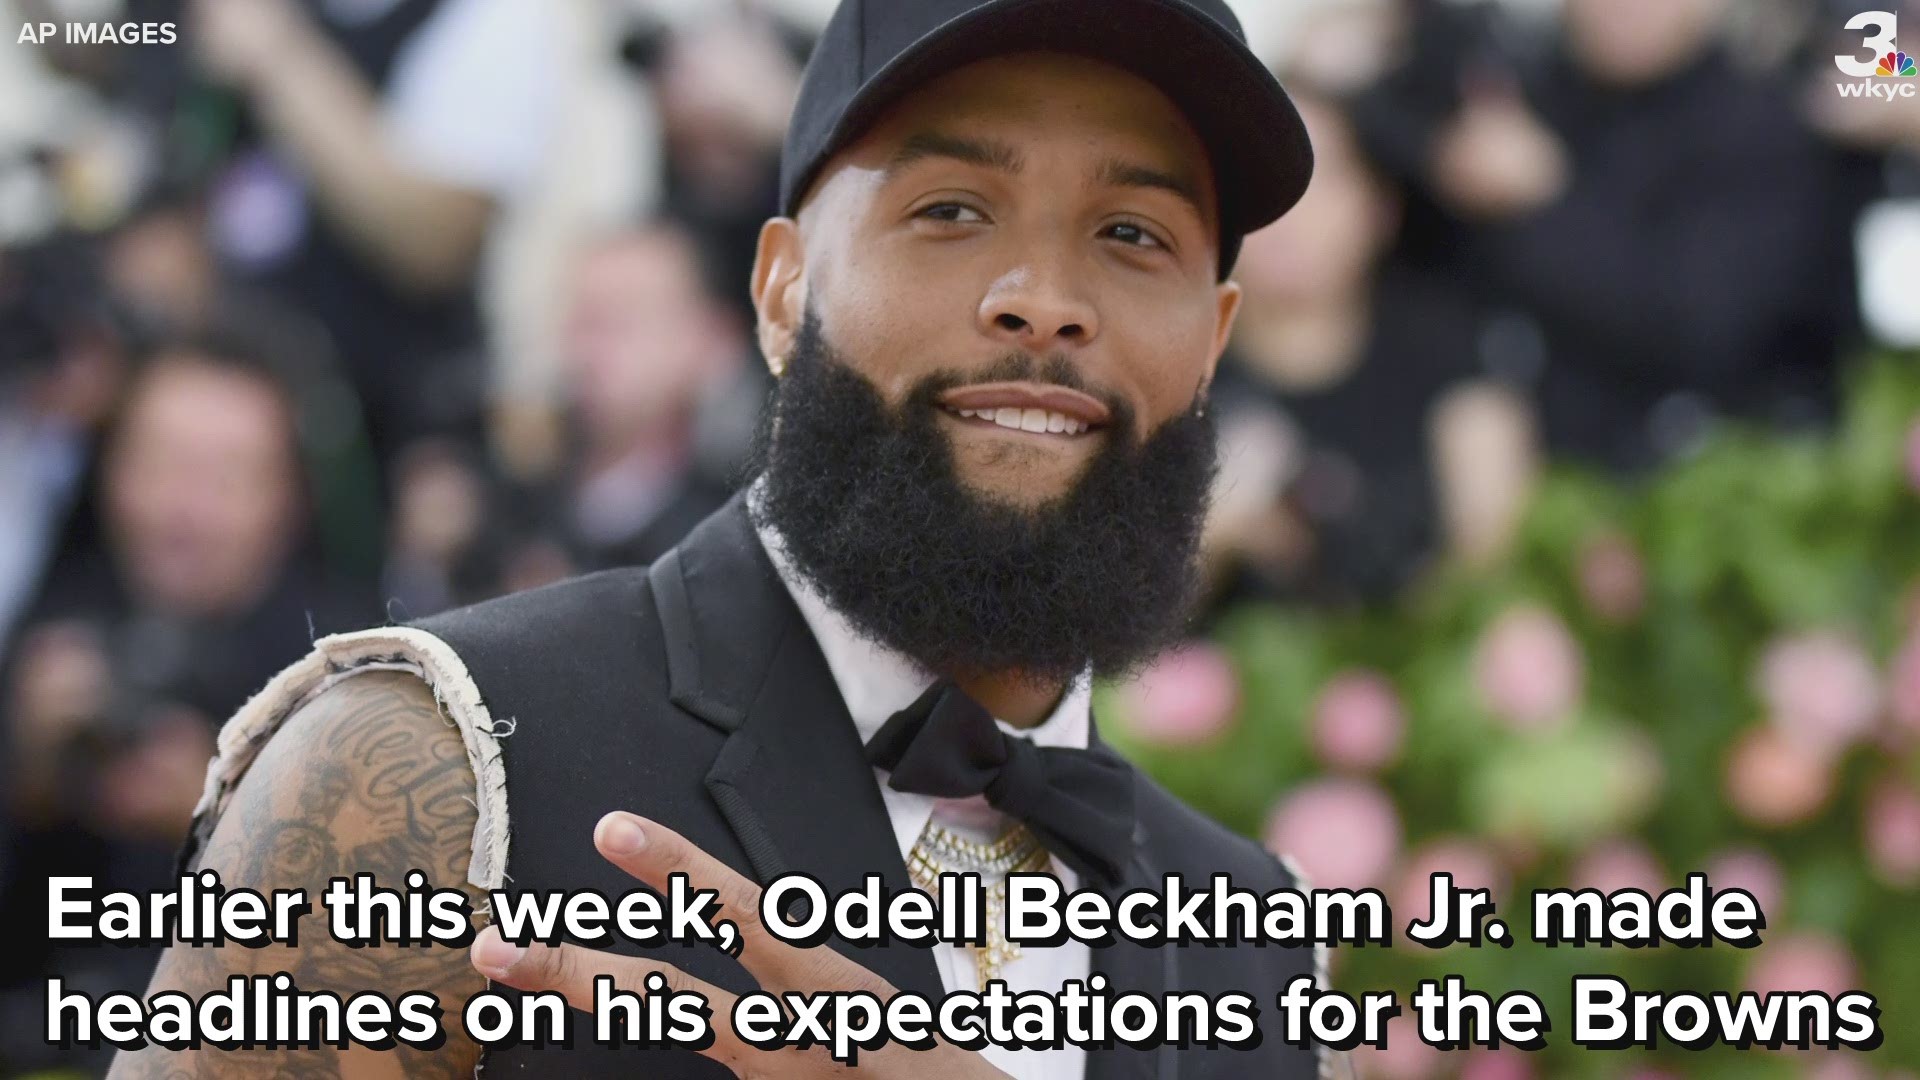 On Thursday, Cleveland Browns wide receiver Odell Beckham Jr. took to Instagram to clarify comments stating he wanted to lead his team to a New England Patriots-like dynasty.